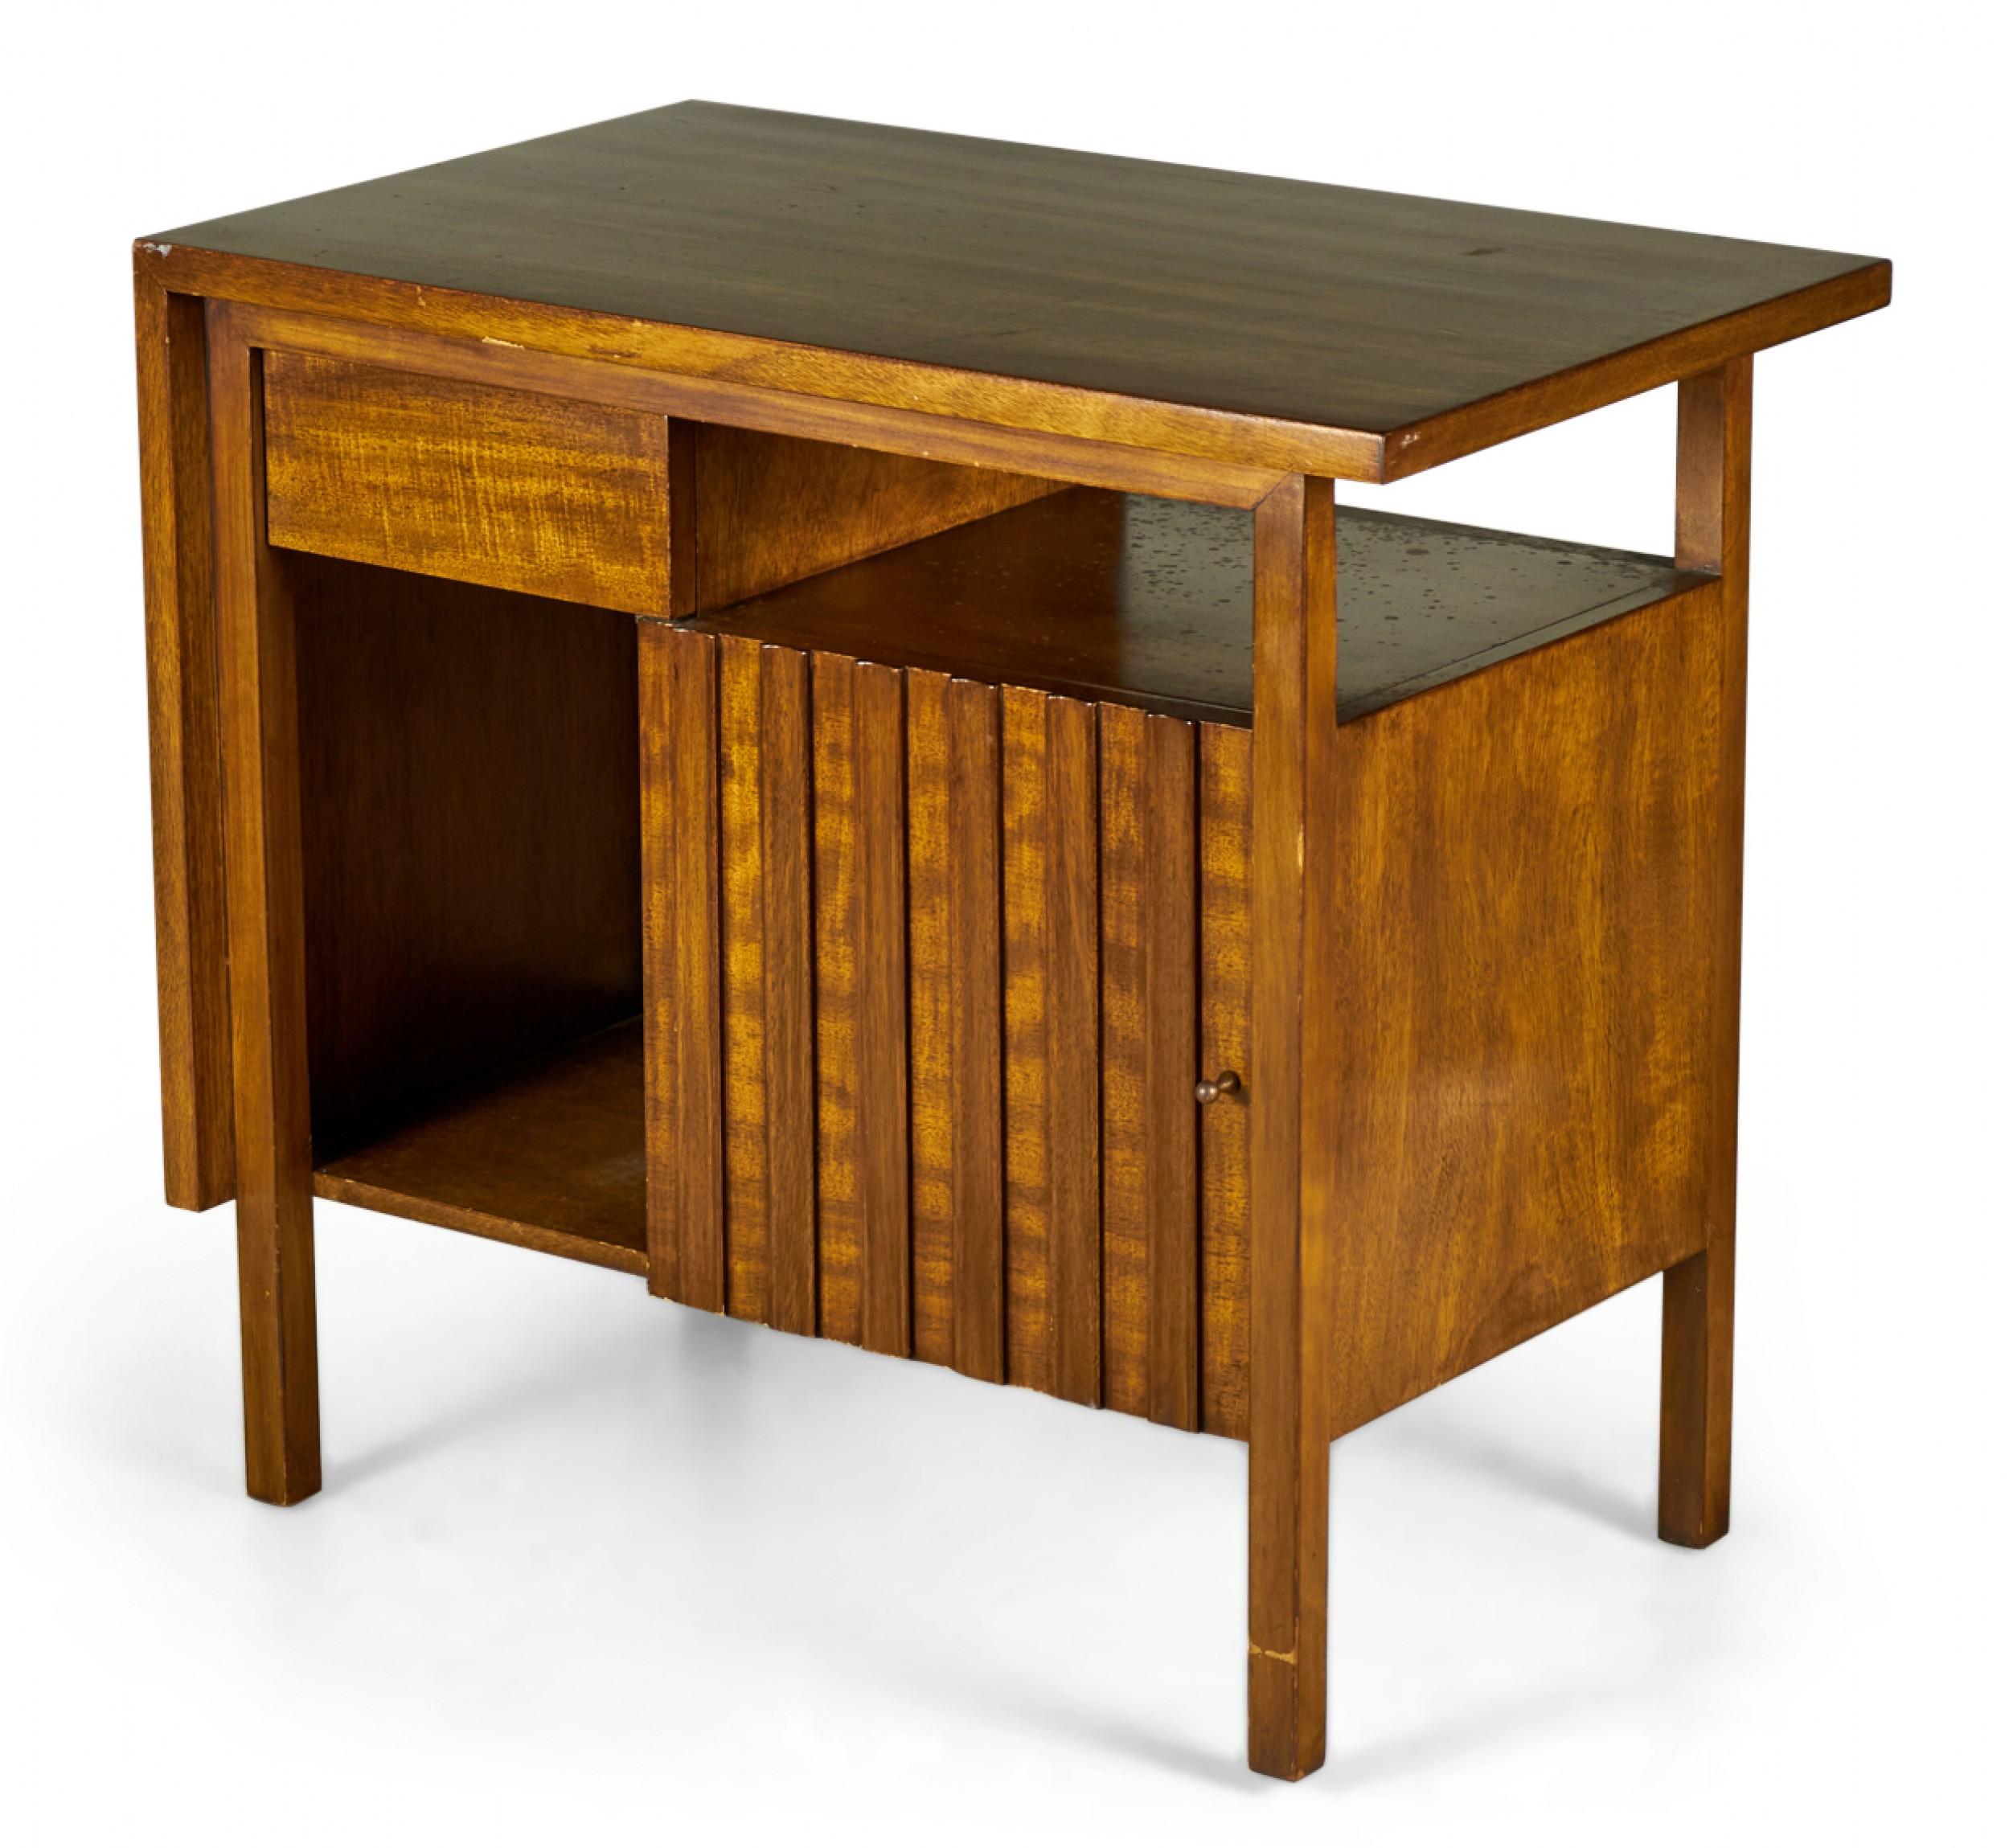 3 American Mid-Century walnut bedside tables / end tables with a single drawer to the left of an open compartment over a mirrored base arrangement comprised of an open cabinet and a larger closed cabinet that opens to the right with a slat front